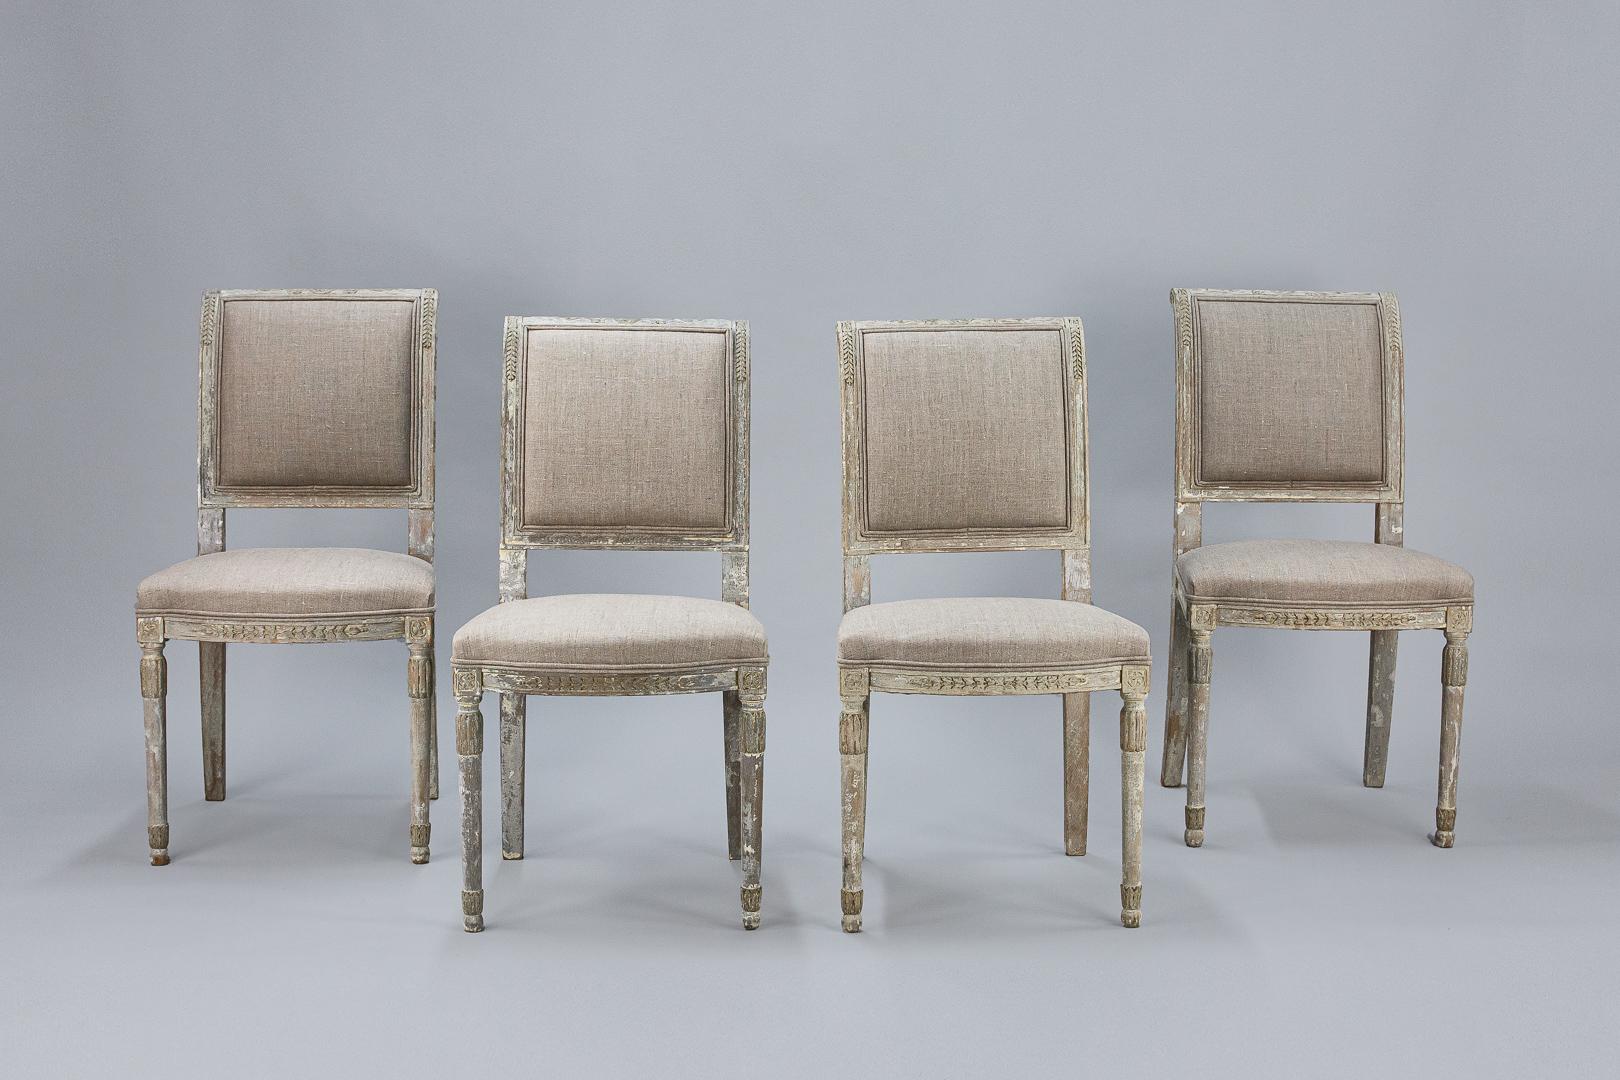 Set of four late 19th century Swedish chairs, wonderful carved details, dry scraped back to the original pale blue grey finish. Smartly reupholstered, Sweden, circa 1890. Priced as a set, seat height 46cm
Dimensions: 44cm x 87cm x 47cm.